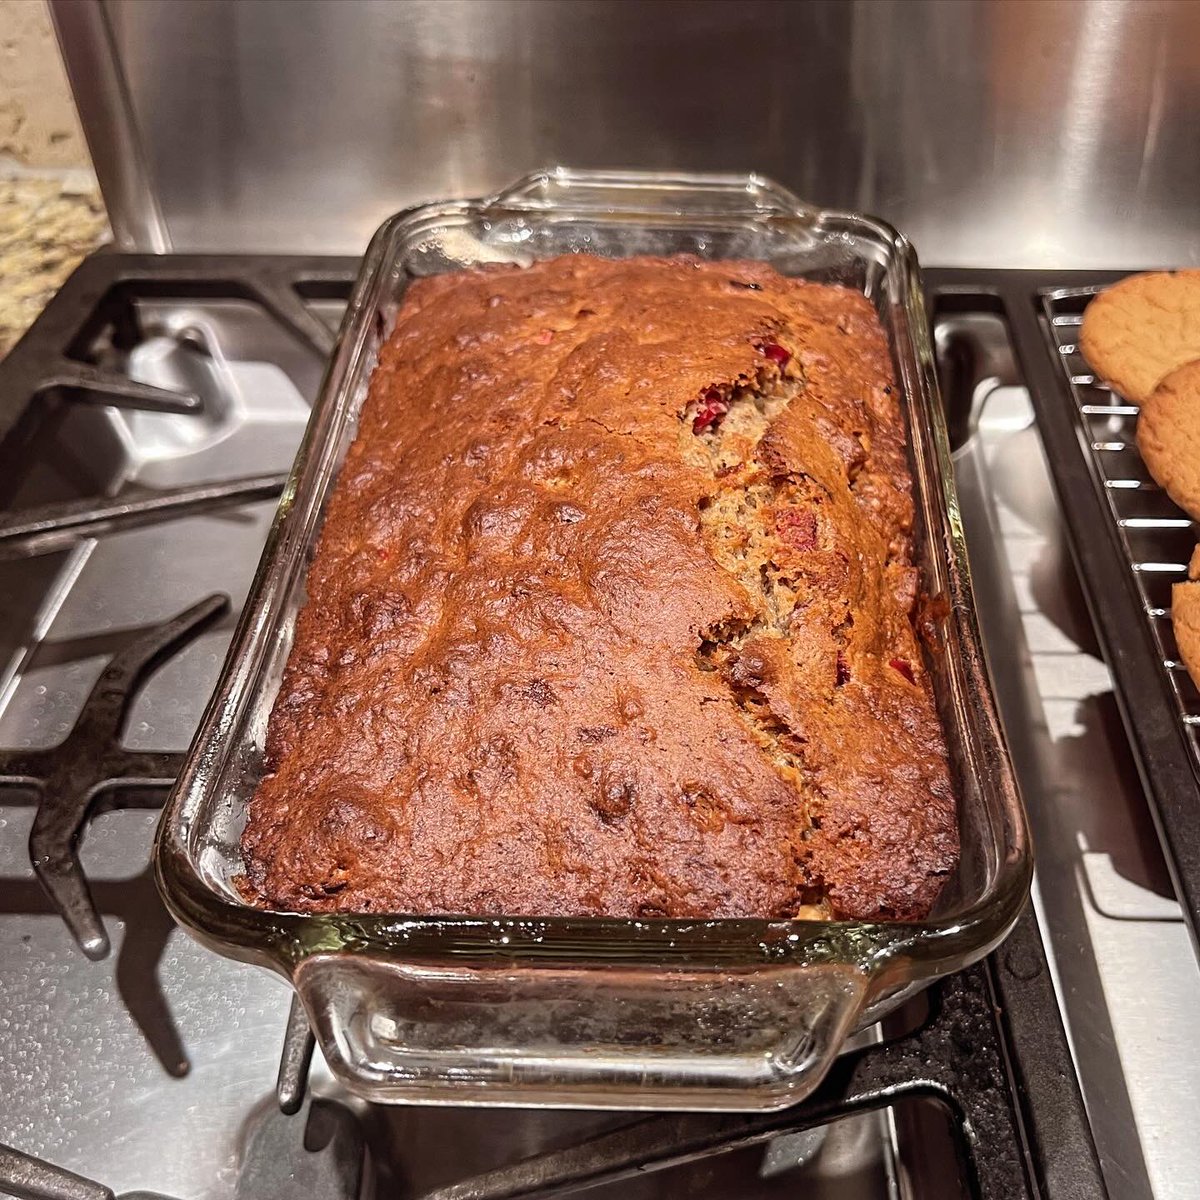 It’s a rainy day so I asked my wife, 
“you want me to bake you some buns, peanut butter cookies or a cranberry walnut banana bread?” 

She said, “surprise me”.

OK then!!